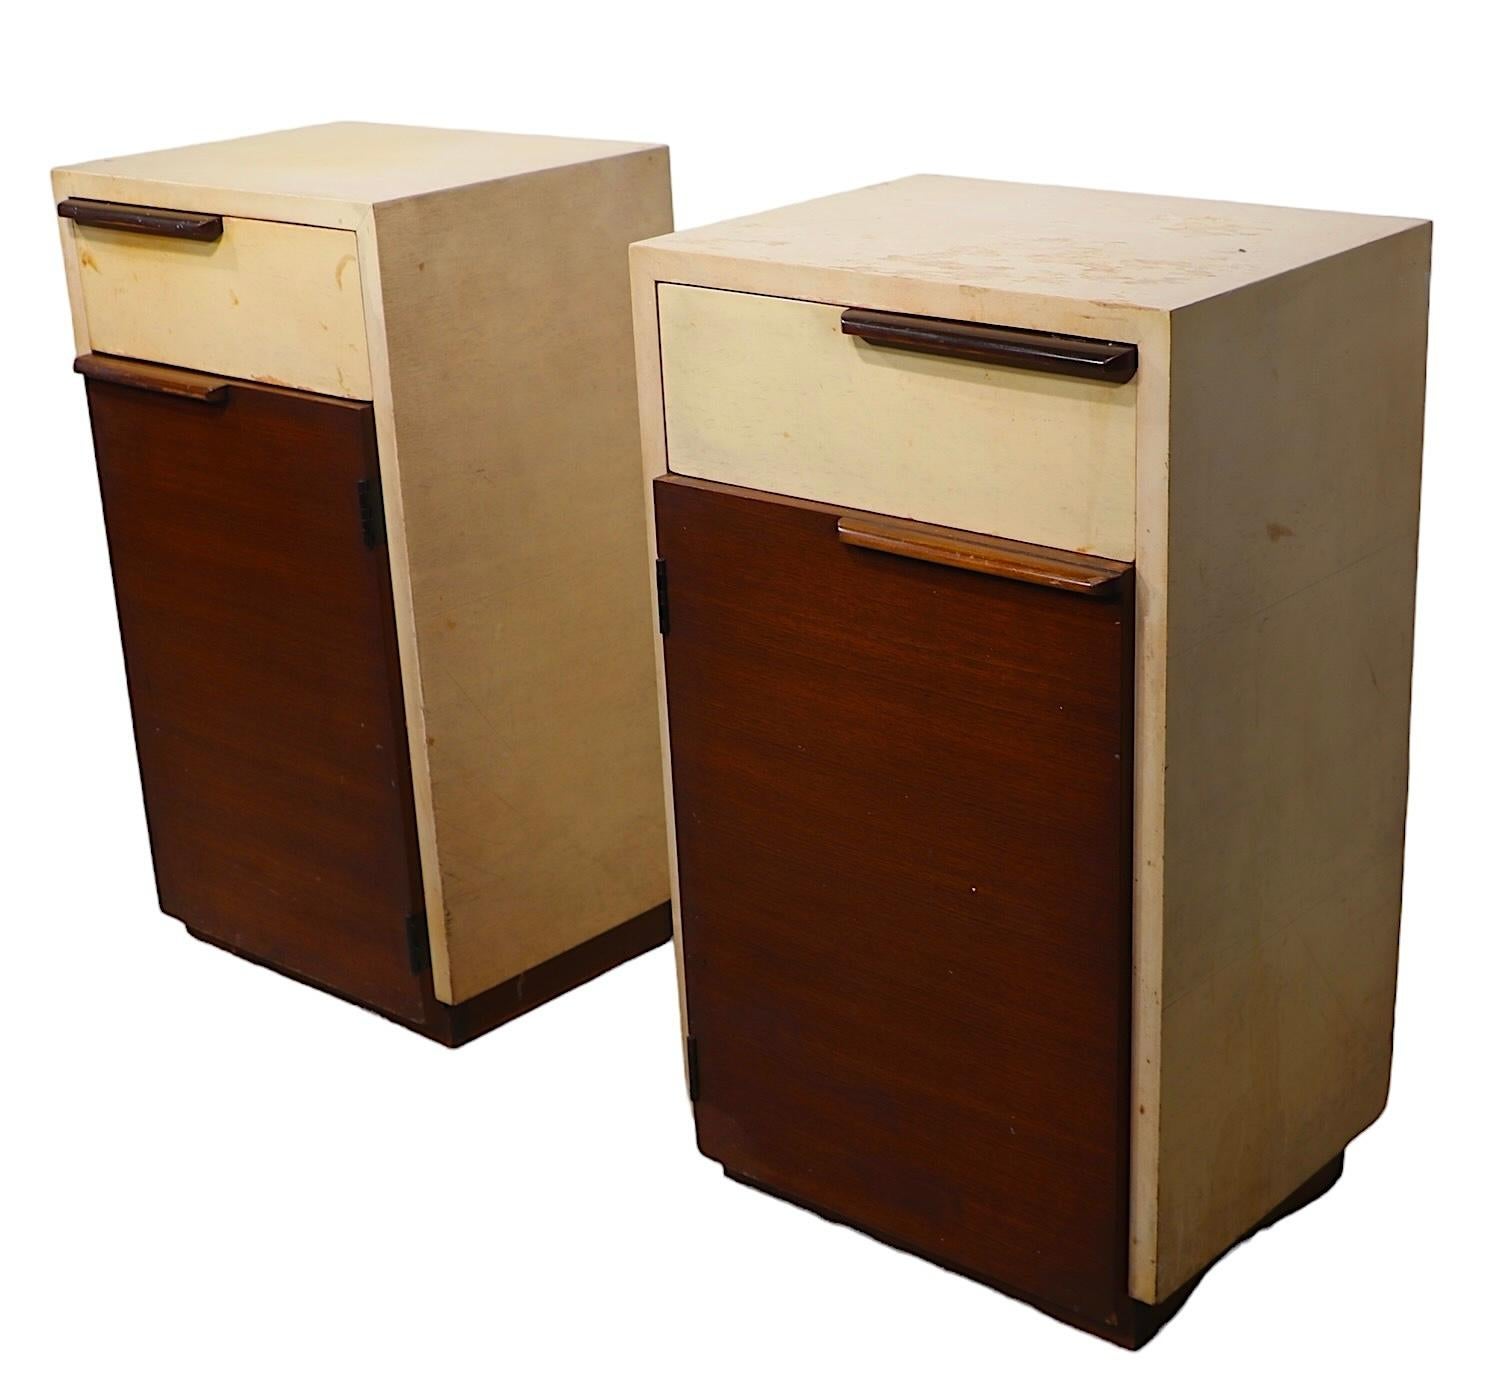 Veneer Pr. Art Deco Art Moderne Two Tone Night Stand Tables by Rohde for Herman Miller 